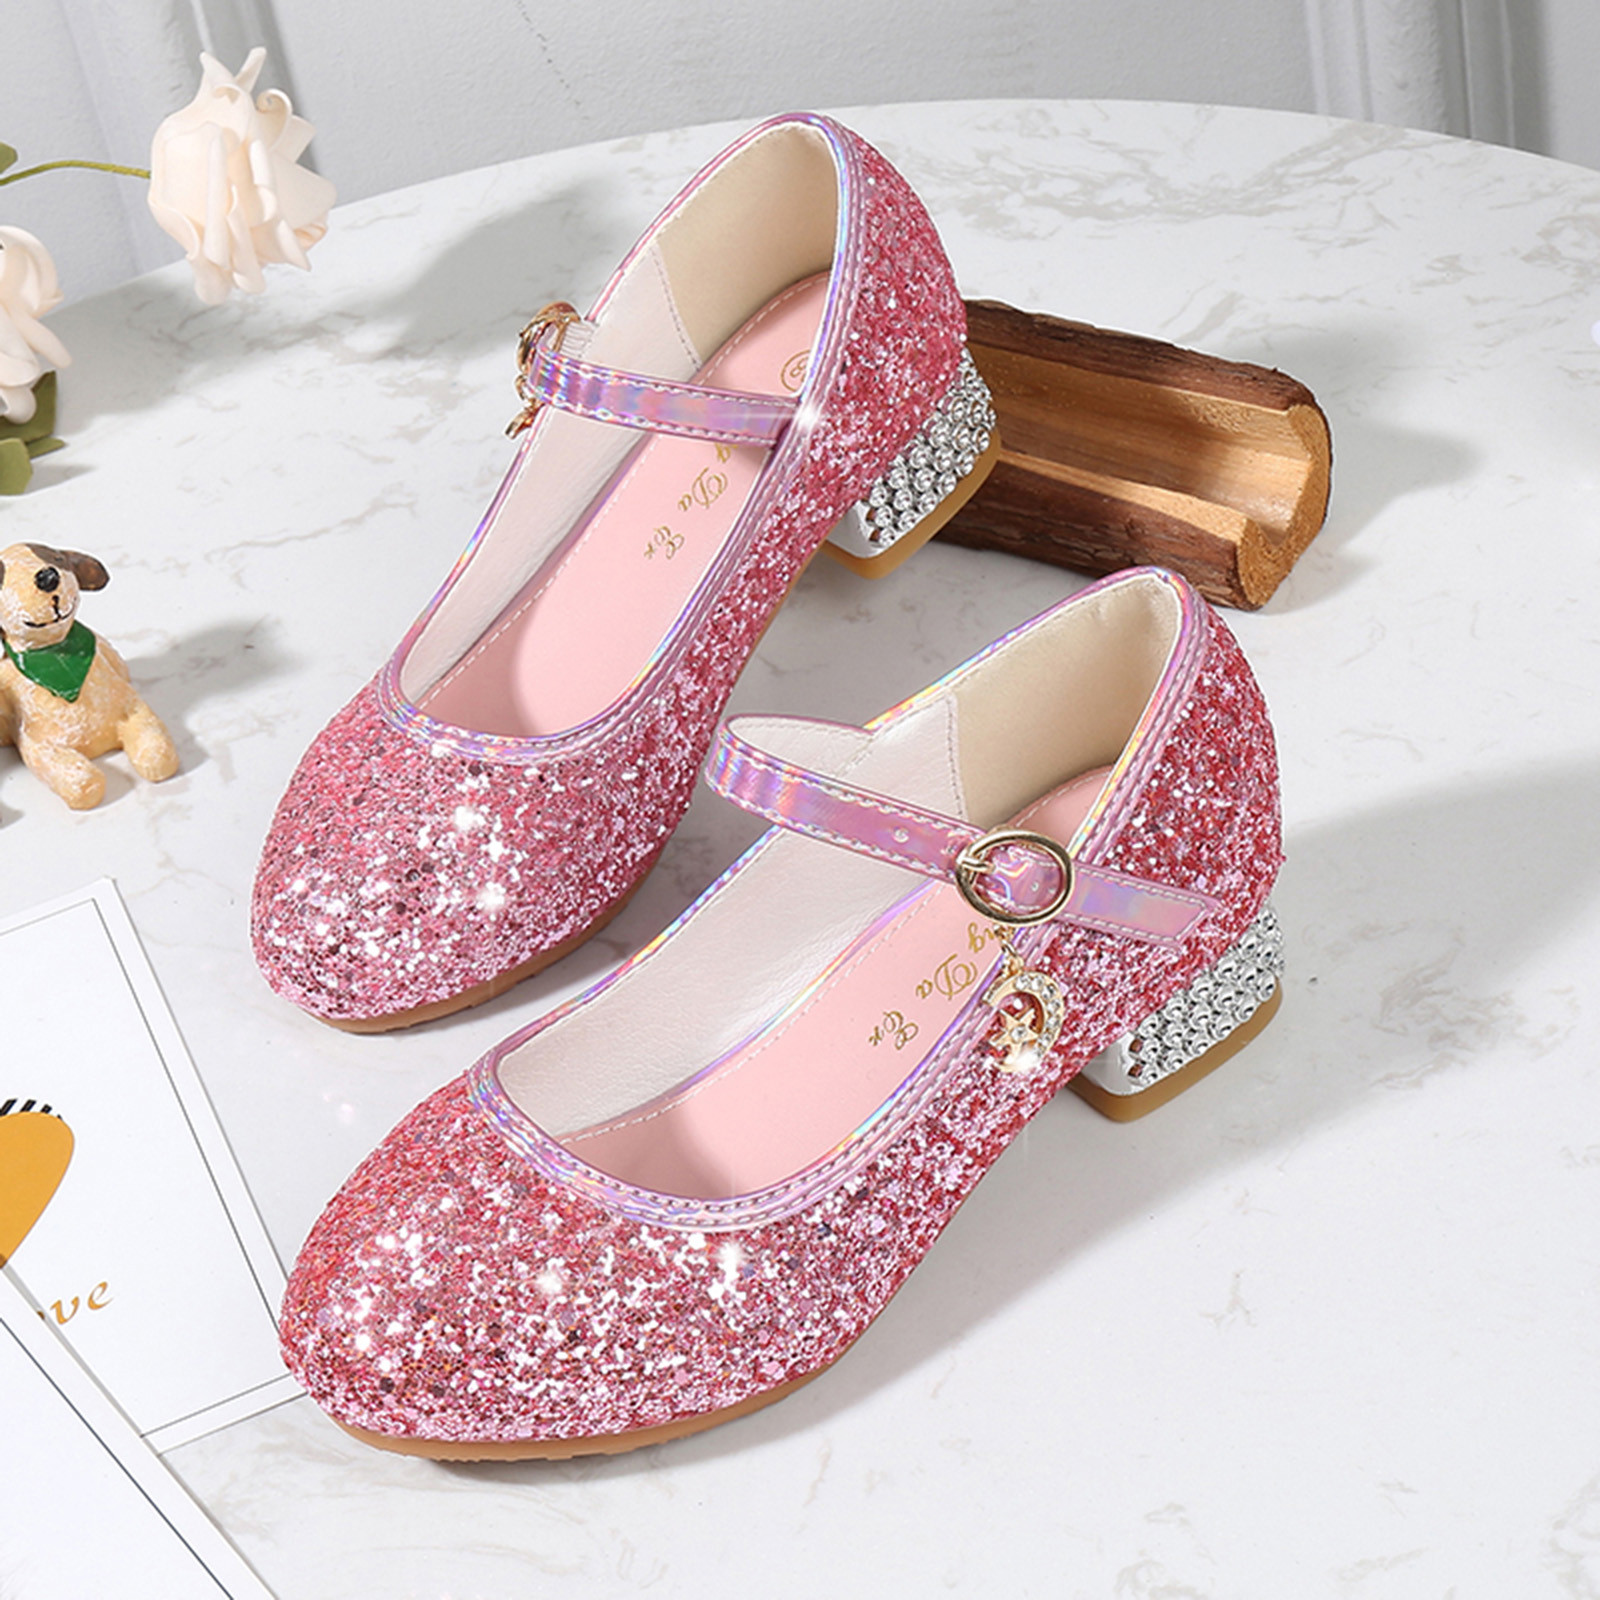 XINSHIDE Shoes Toddler Little Kid Girls Pumps Glitter Sequins Princess Low Heels Party Dance Shoes Rhinestone Sandals Baby Casual Shoes - image 2 of 4